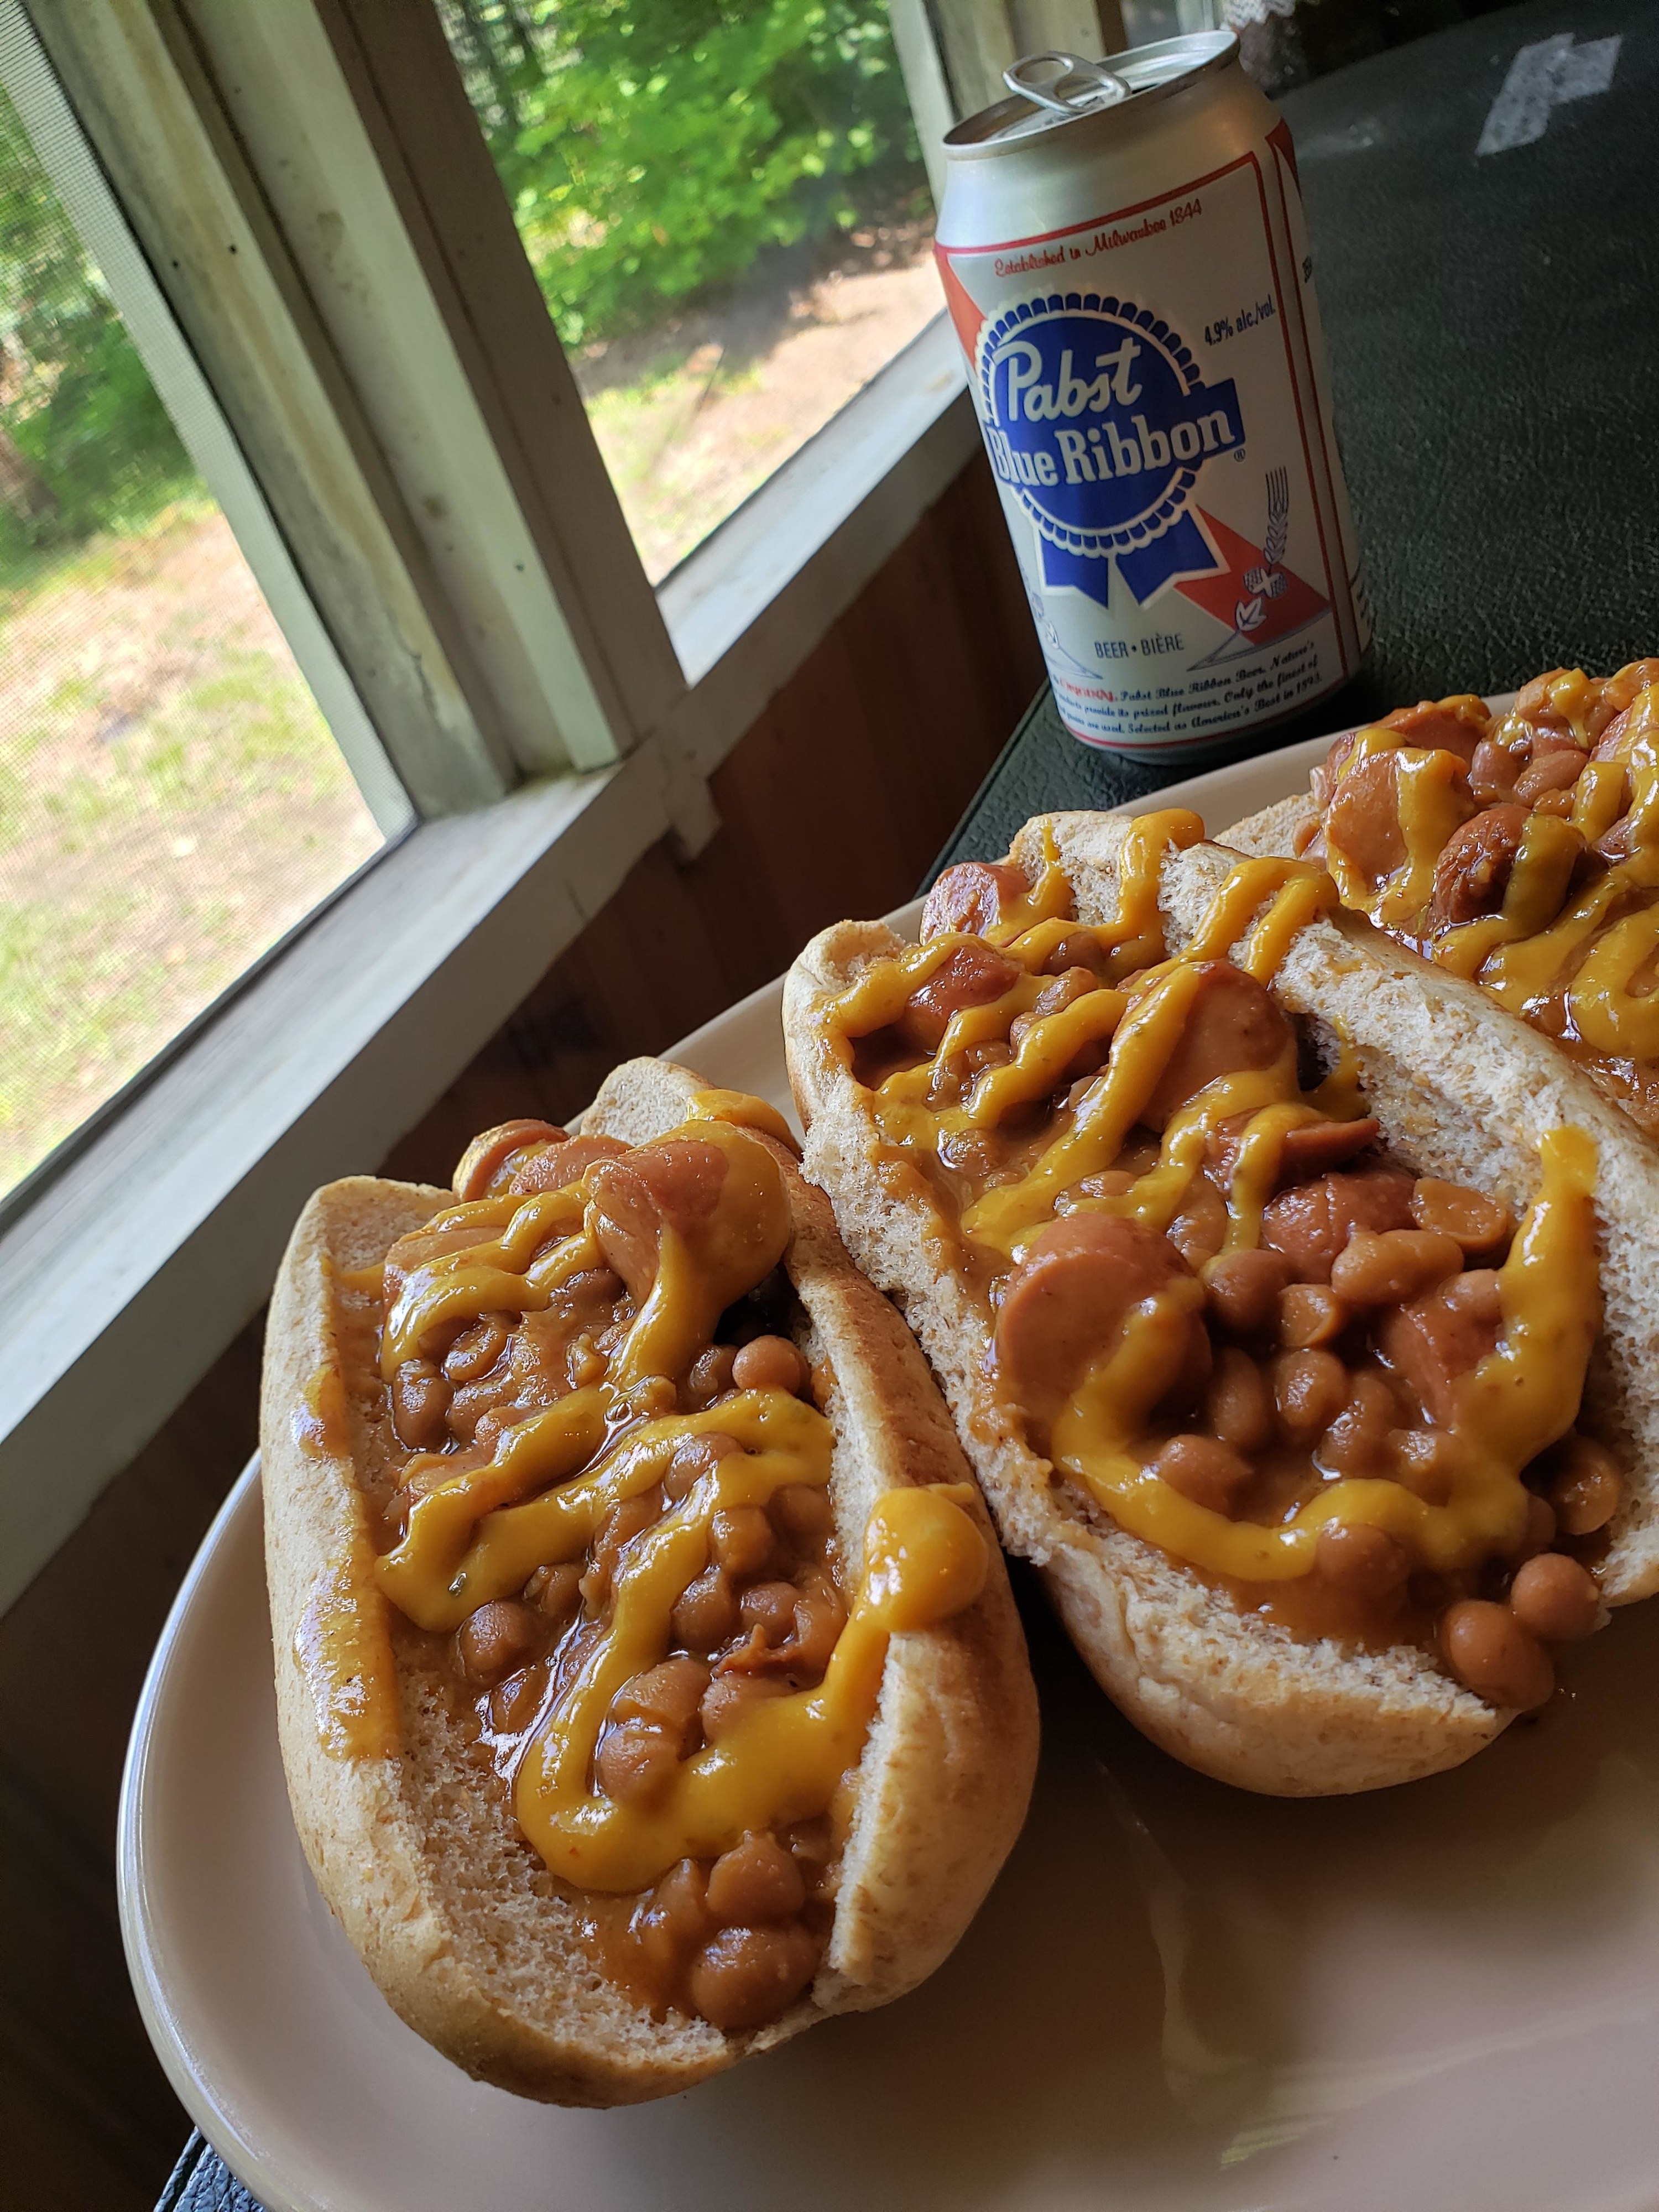 Baked beans and hot dog on a bun